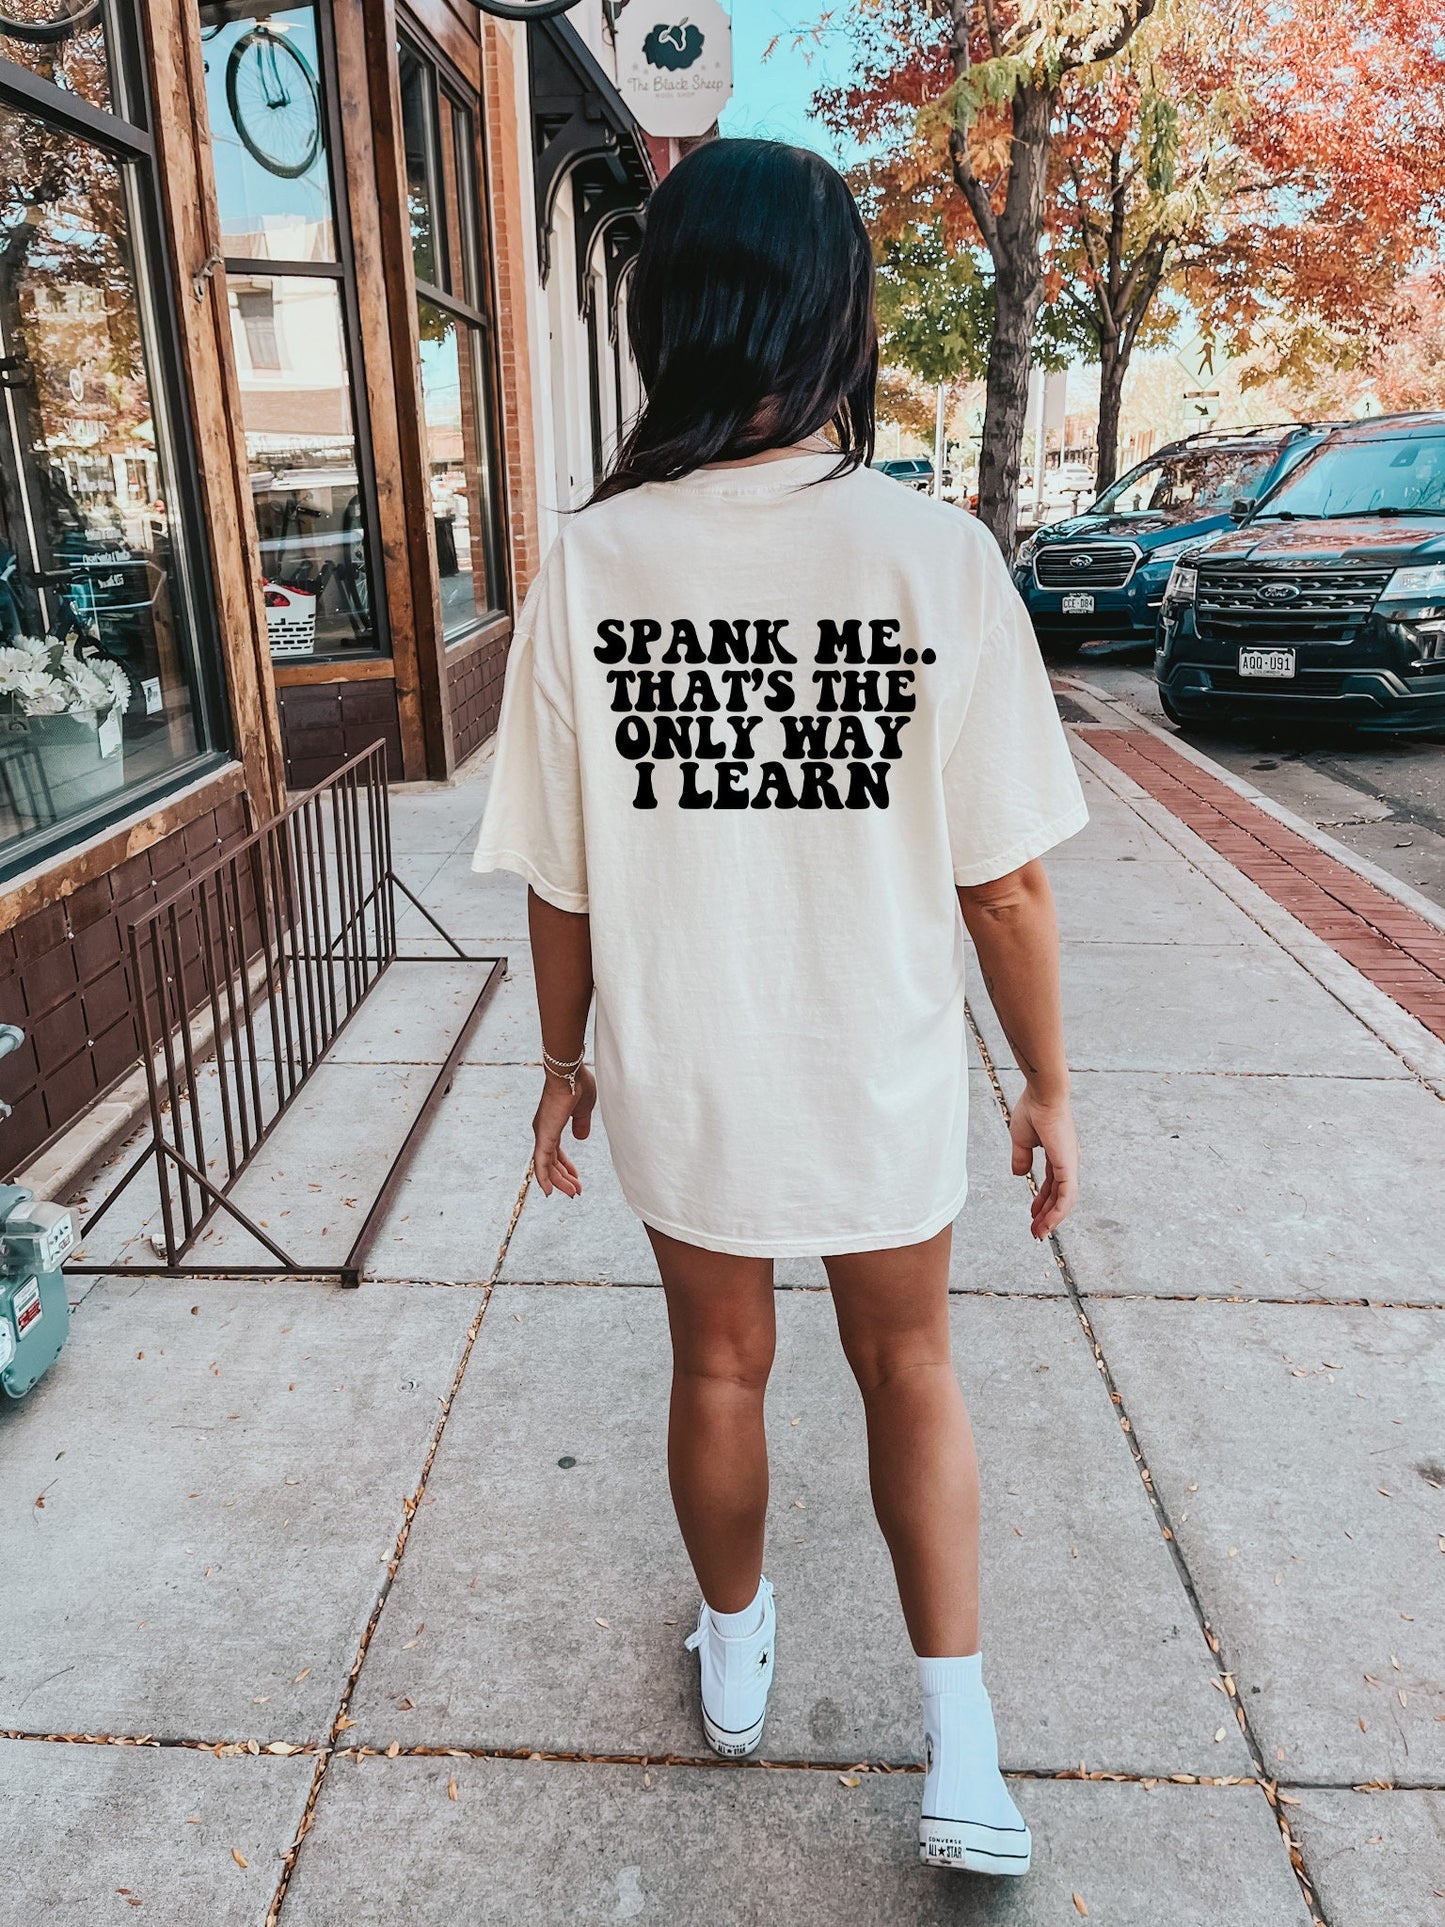 Spank me.. it’s the only way I learn shirt | russ shirt | good girl good girl shirt | adult humor shirt | spank me shirt